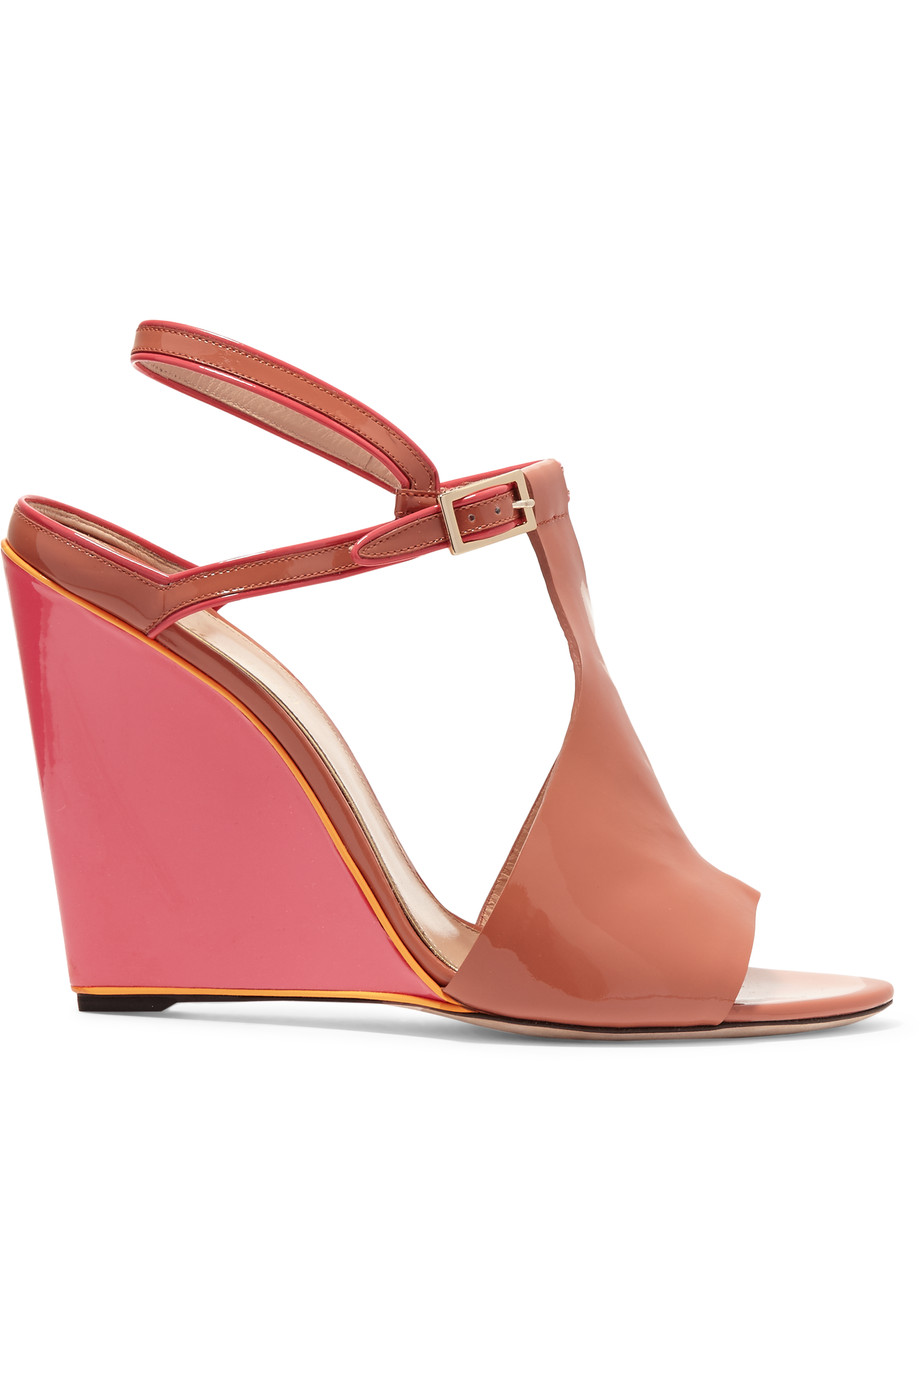 Emilio Pucci Two-tone Patent-leather Wedge Sandals | ModeSens